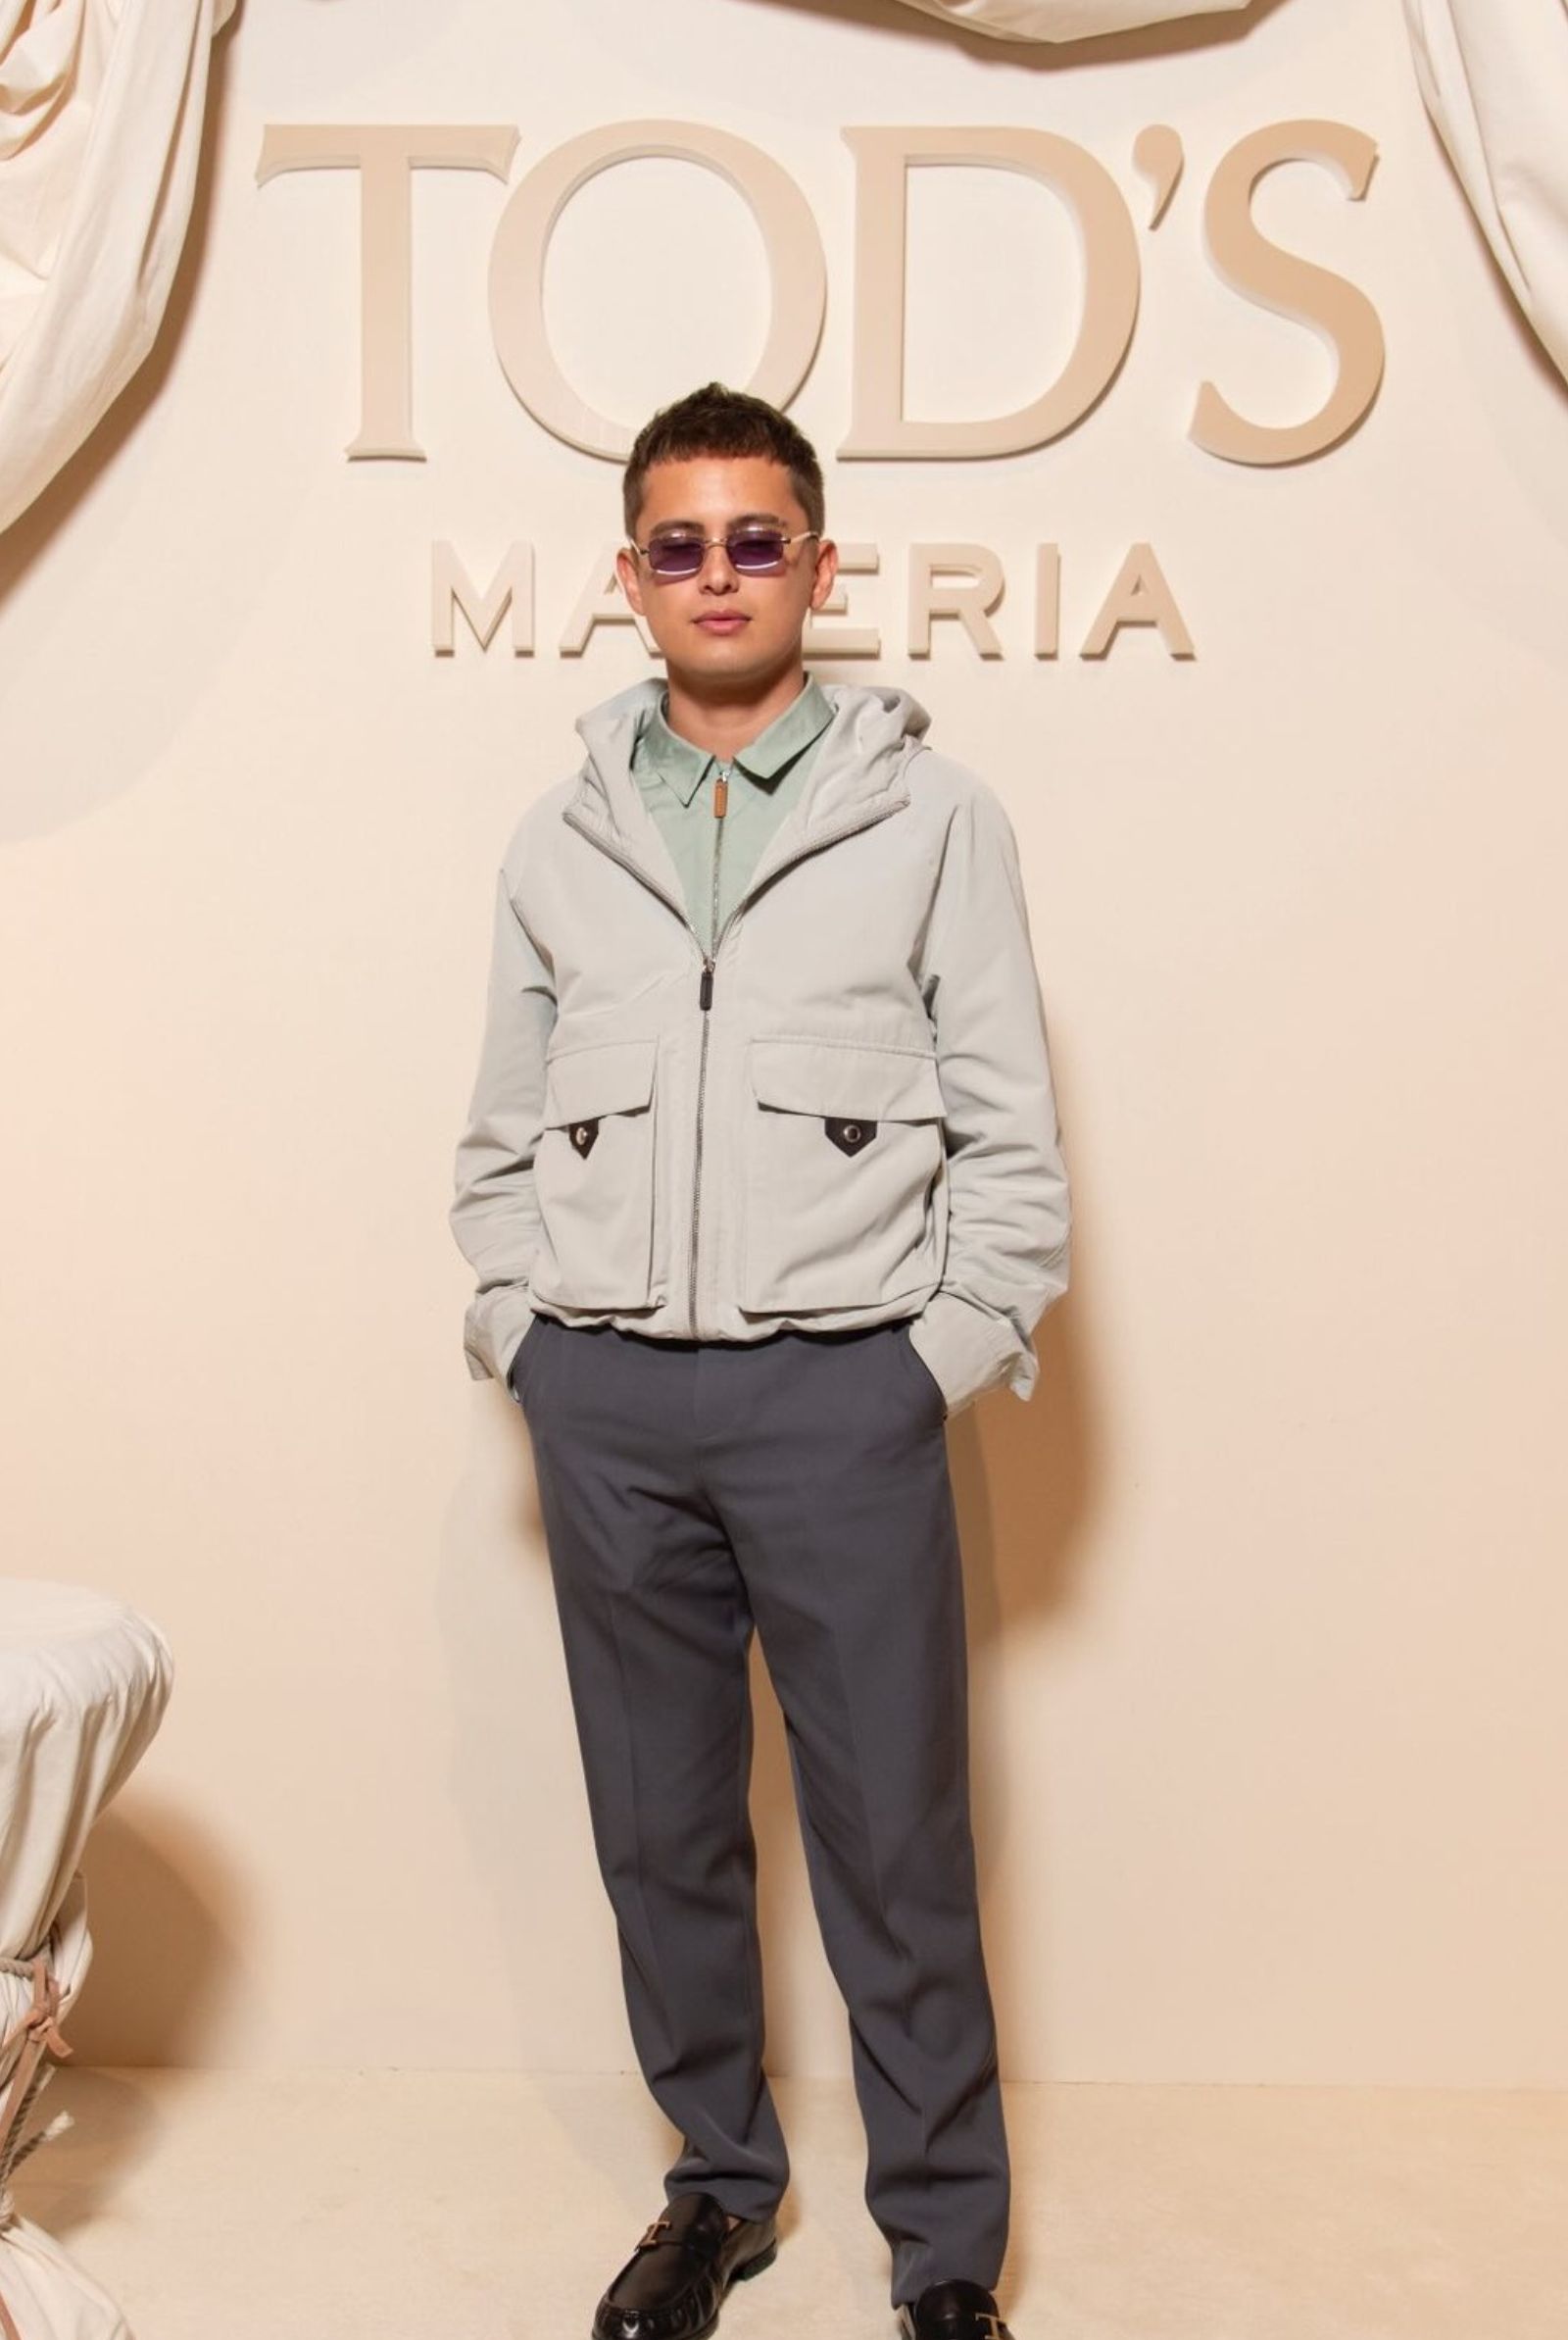 Opting for a polished yet casual style, he attends Tod’s presentation in a pale blue hooded jacket, gray trousers, and loafers